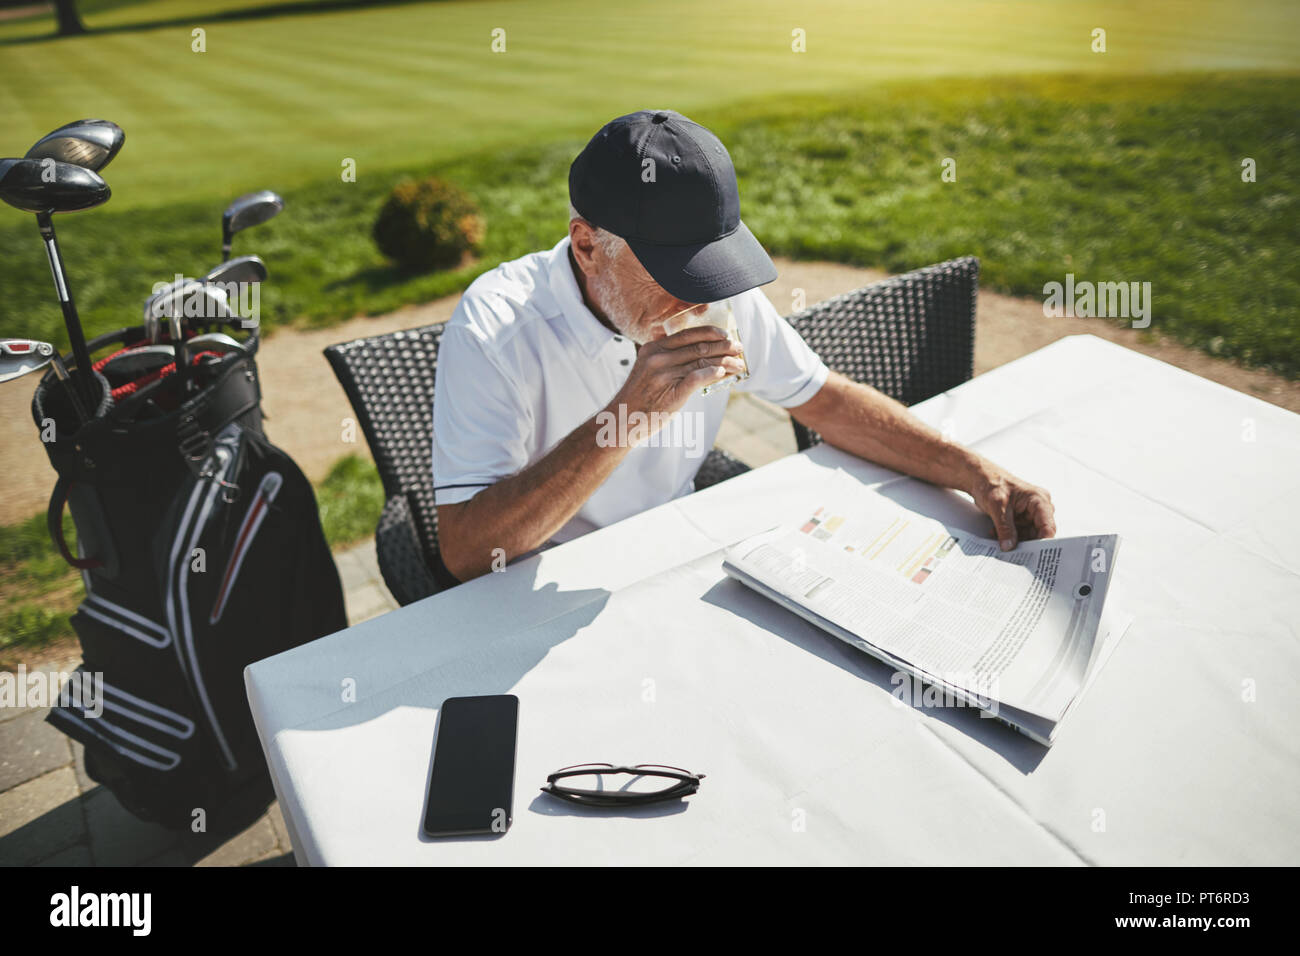 Smiling senior man enjoying a cup of coffee and reading a newspaper while sitting at a course restaurant after a round of golf Stock Photo